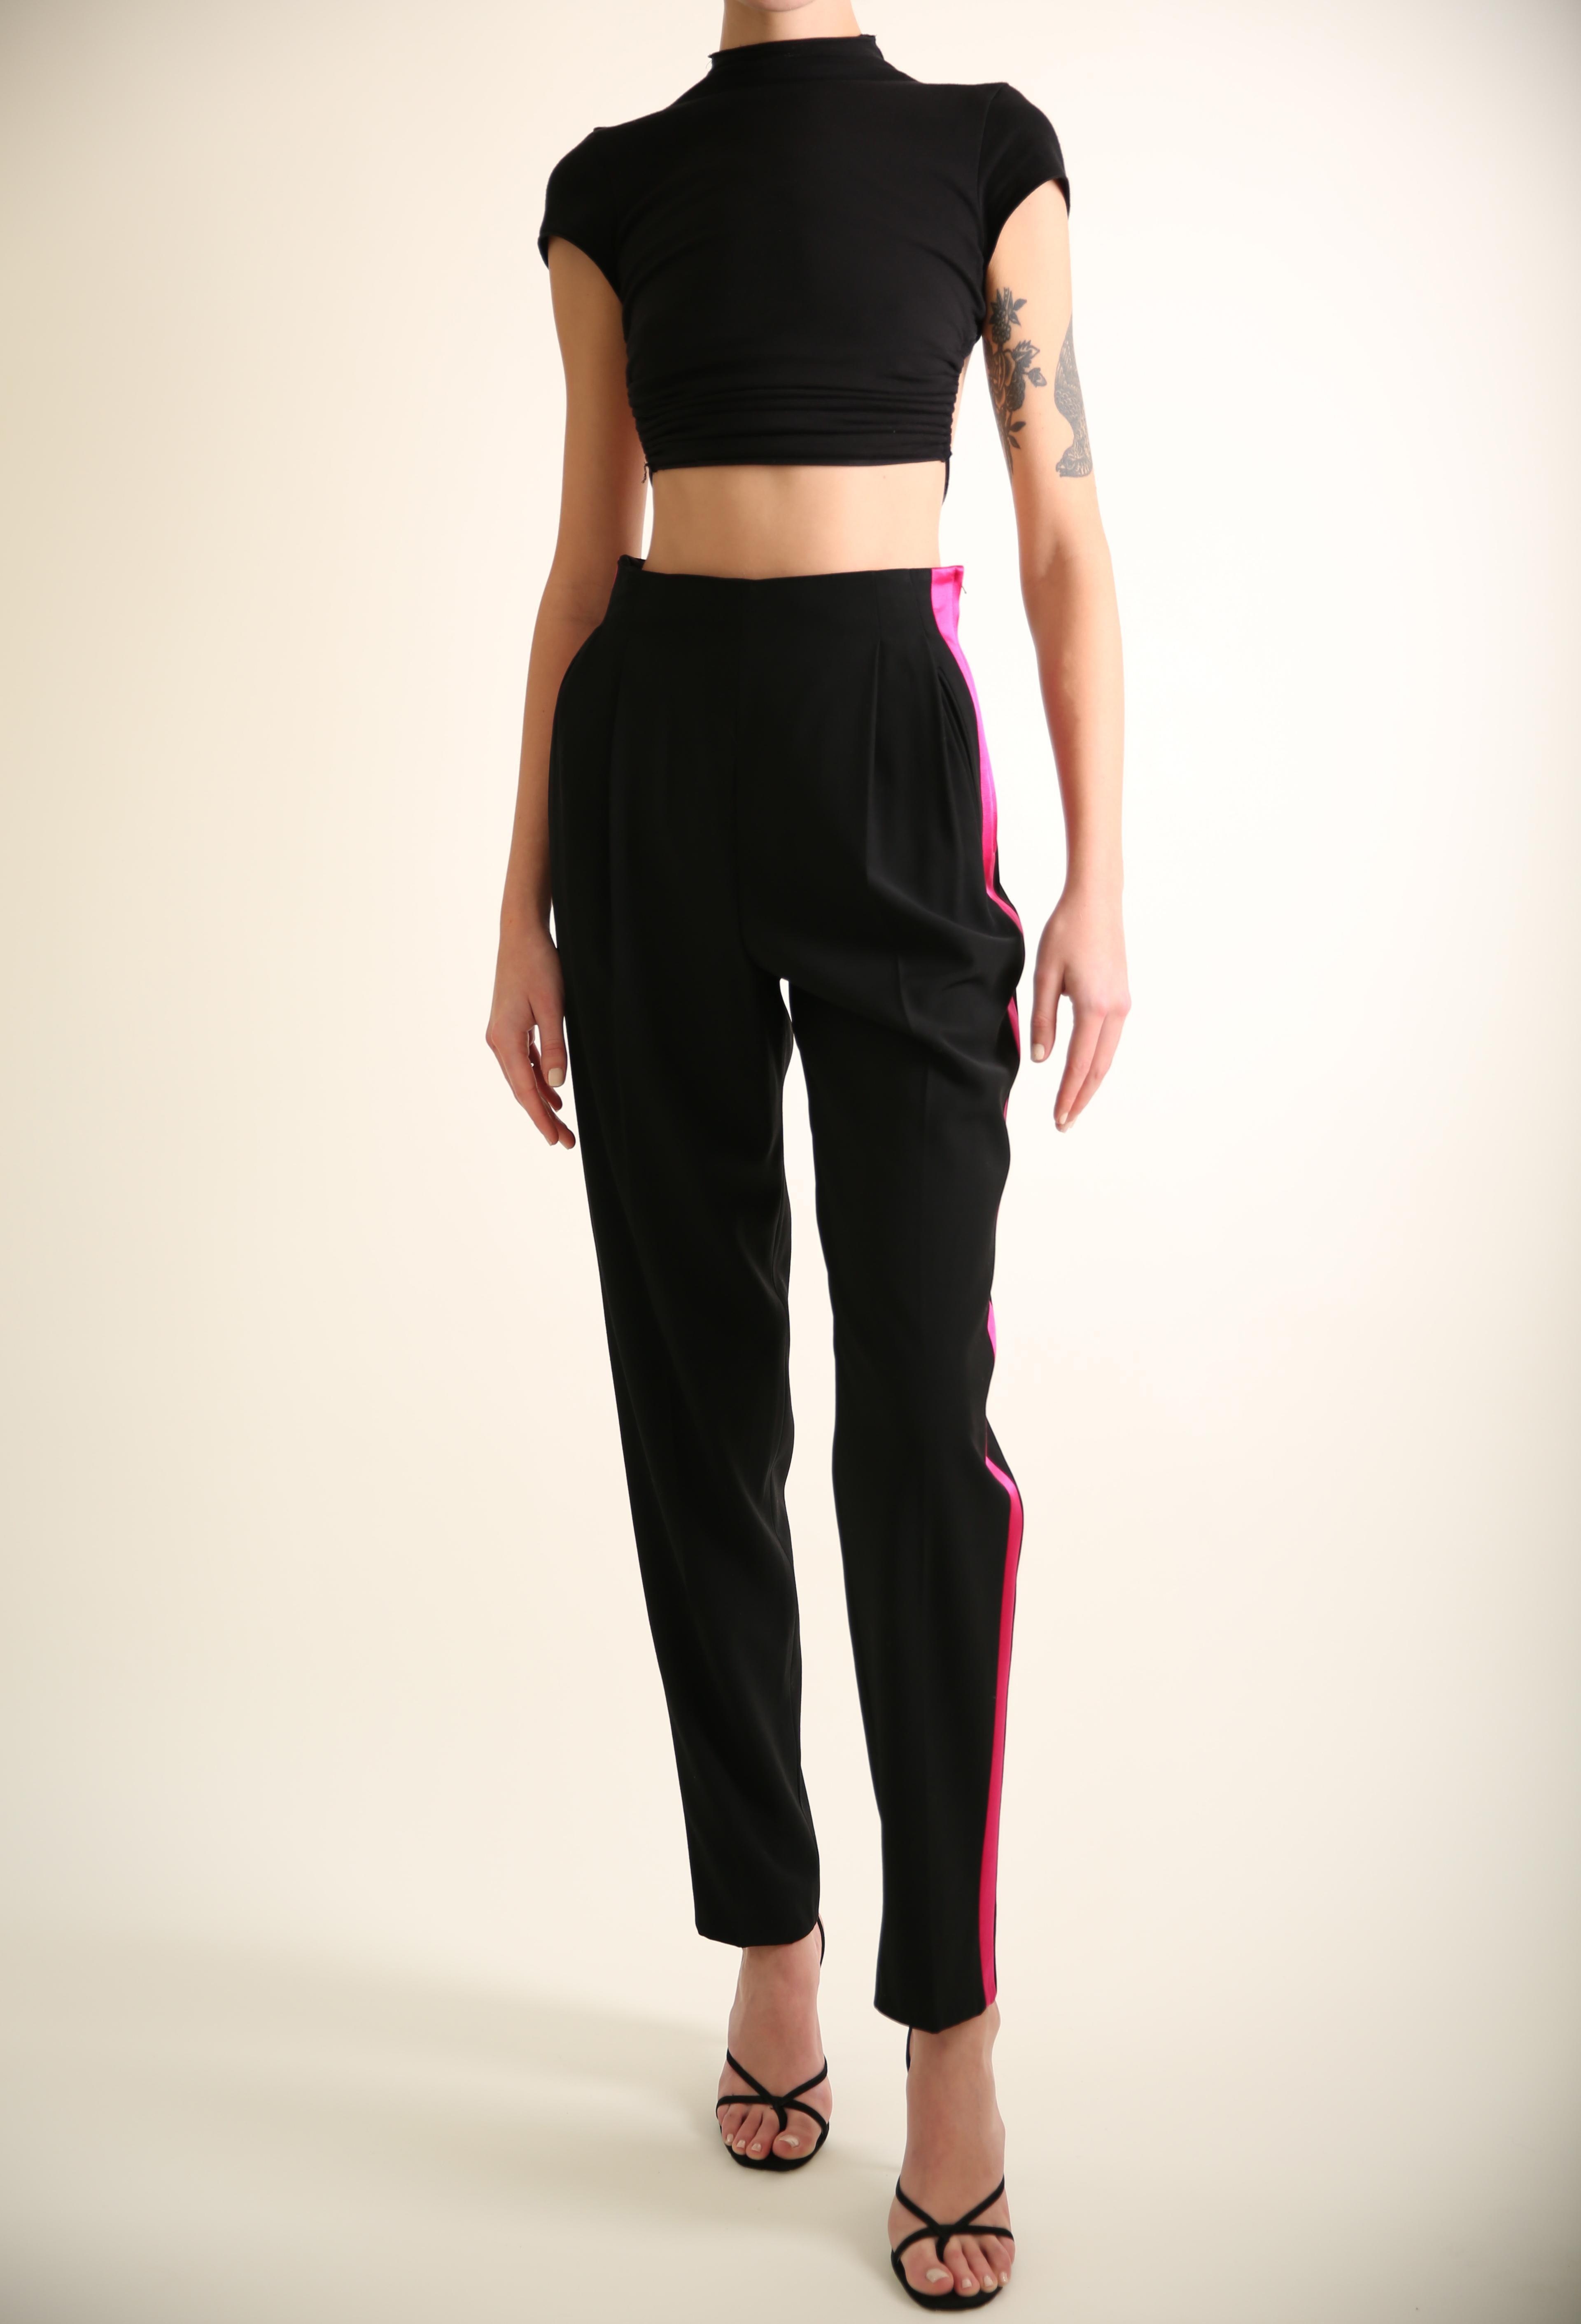 Gianfrano Ferre vintage high rise tapered pants
Black with a bright pink satin tuxedo stripe running down the side
Concealed side zip 
Pin-tuck pleats
Central crease
Two side pockets 


Composition:
100% wool

Size:
IT 40

In excellent condition